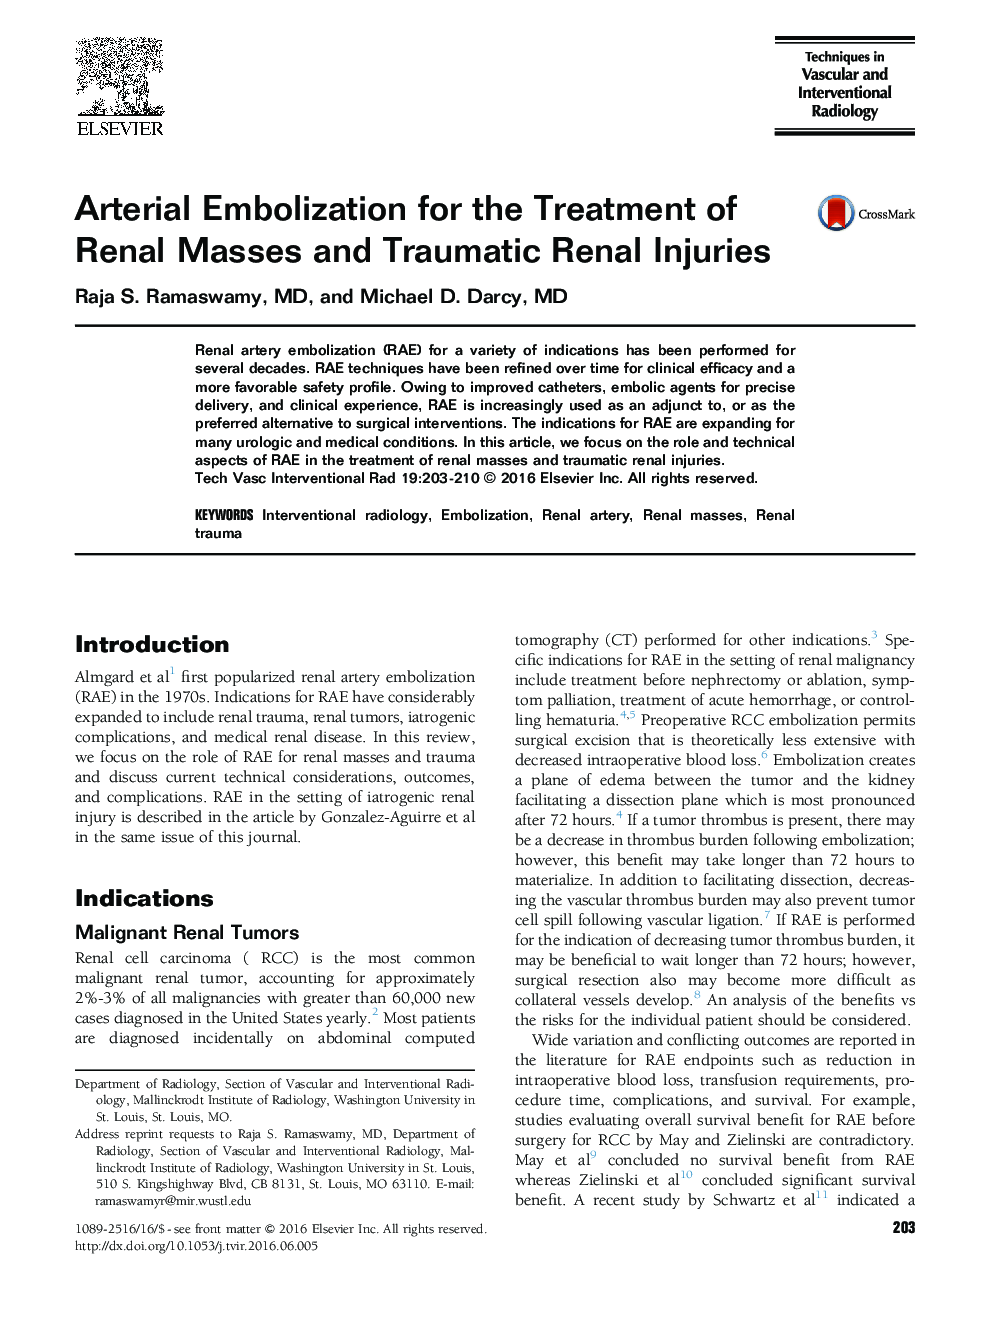 Arterial Embolization for the Treatment of Renal Masses and Traumatic Renal Injuries